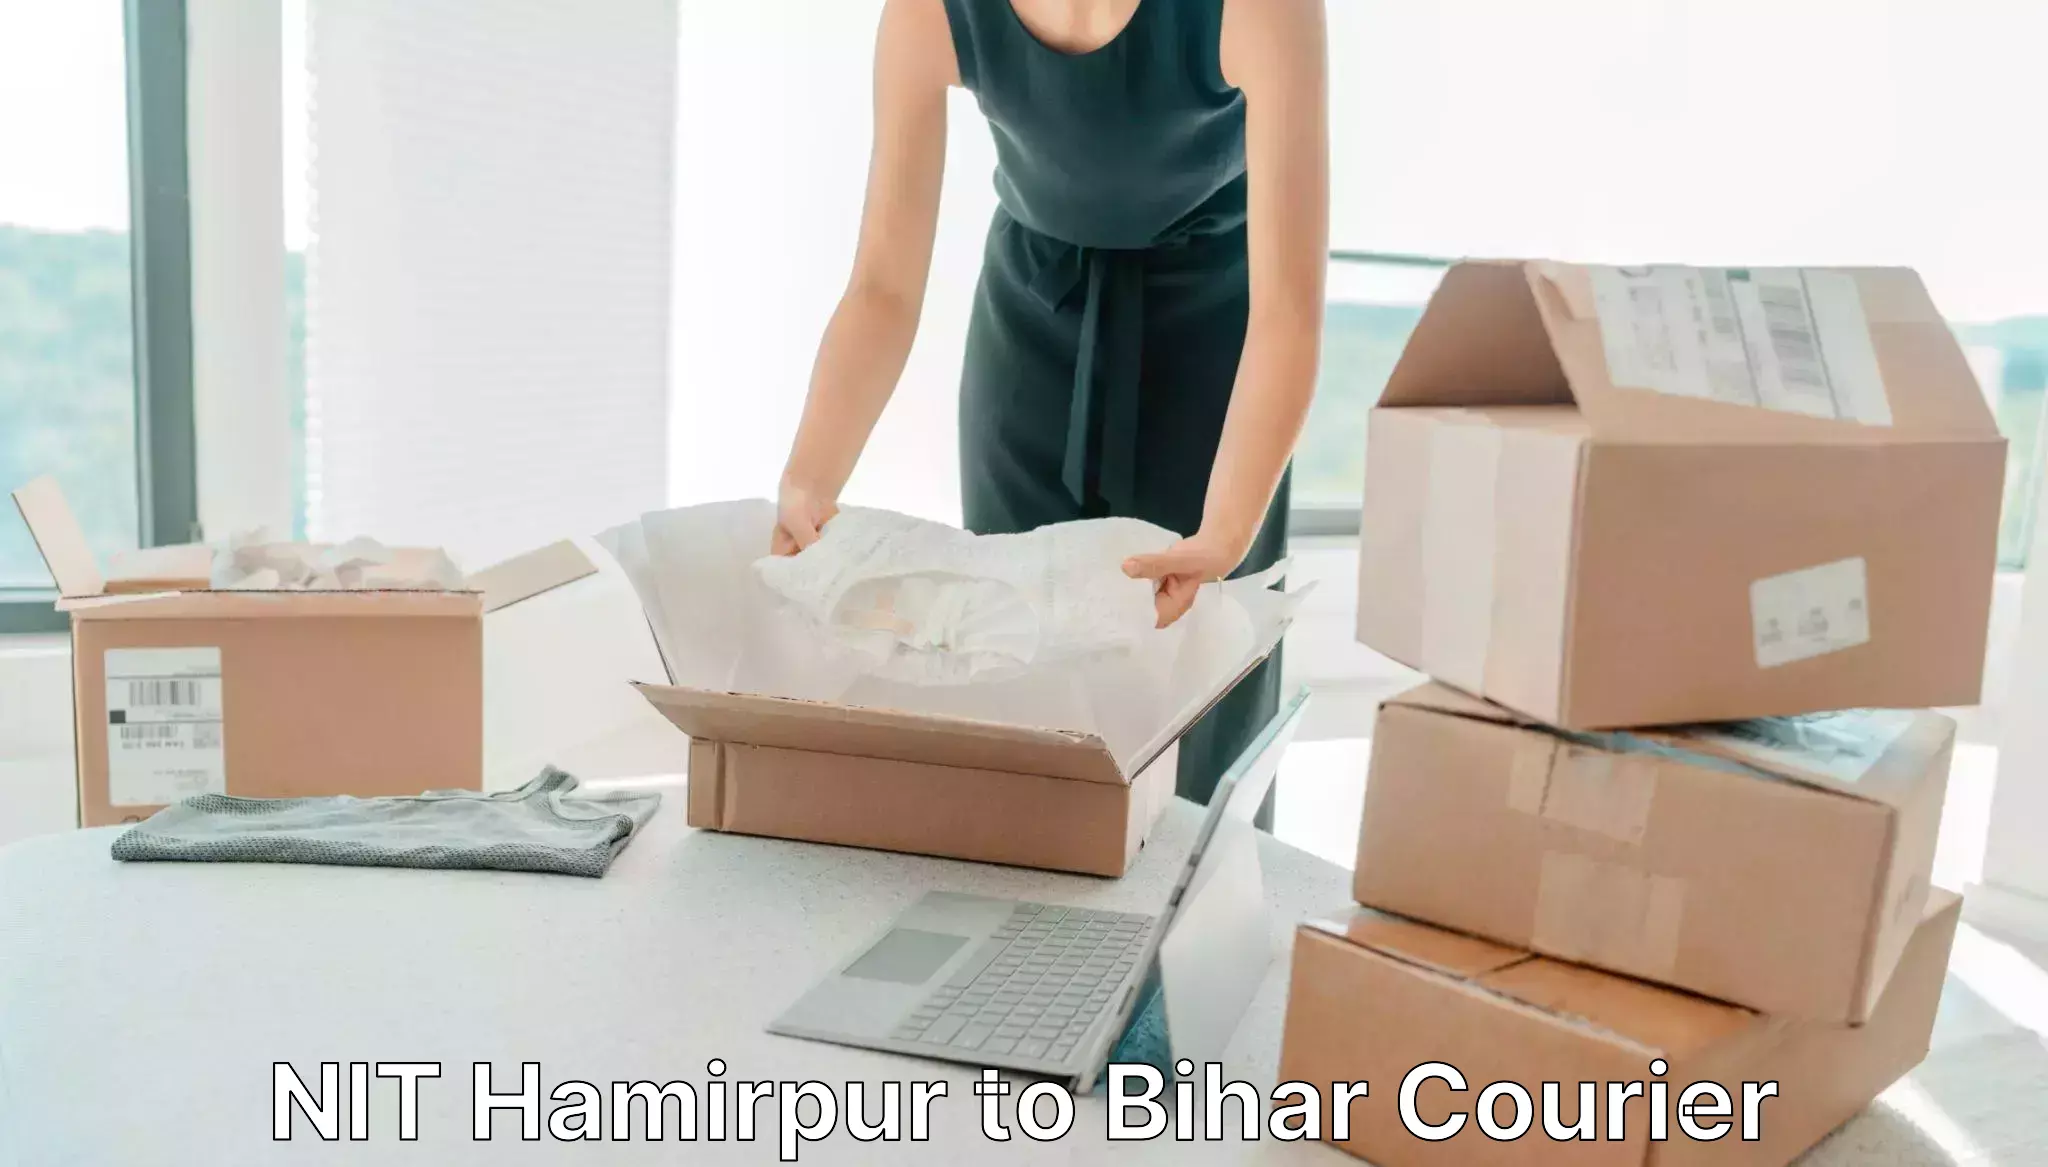 Professional courier services NIT Hamirpur to Punsia